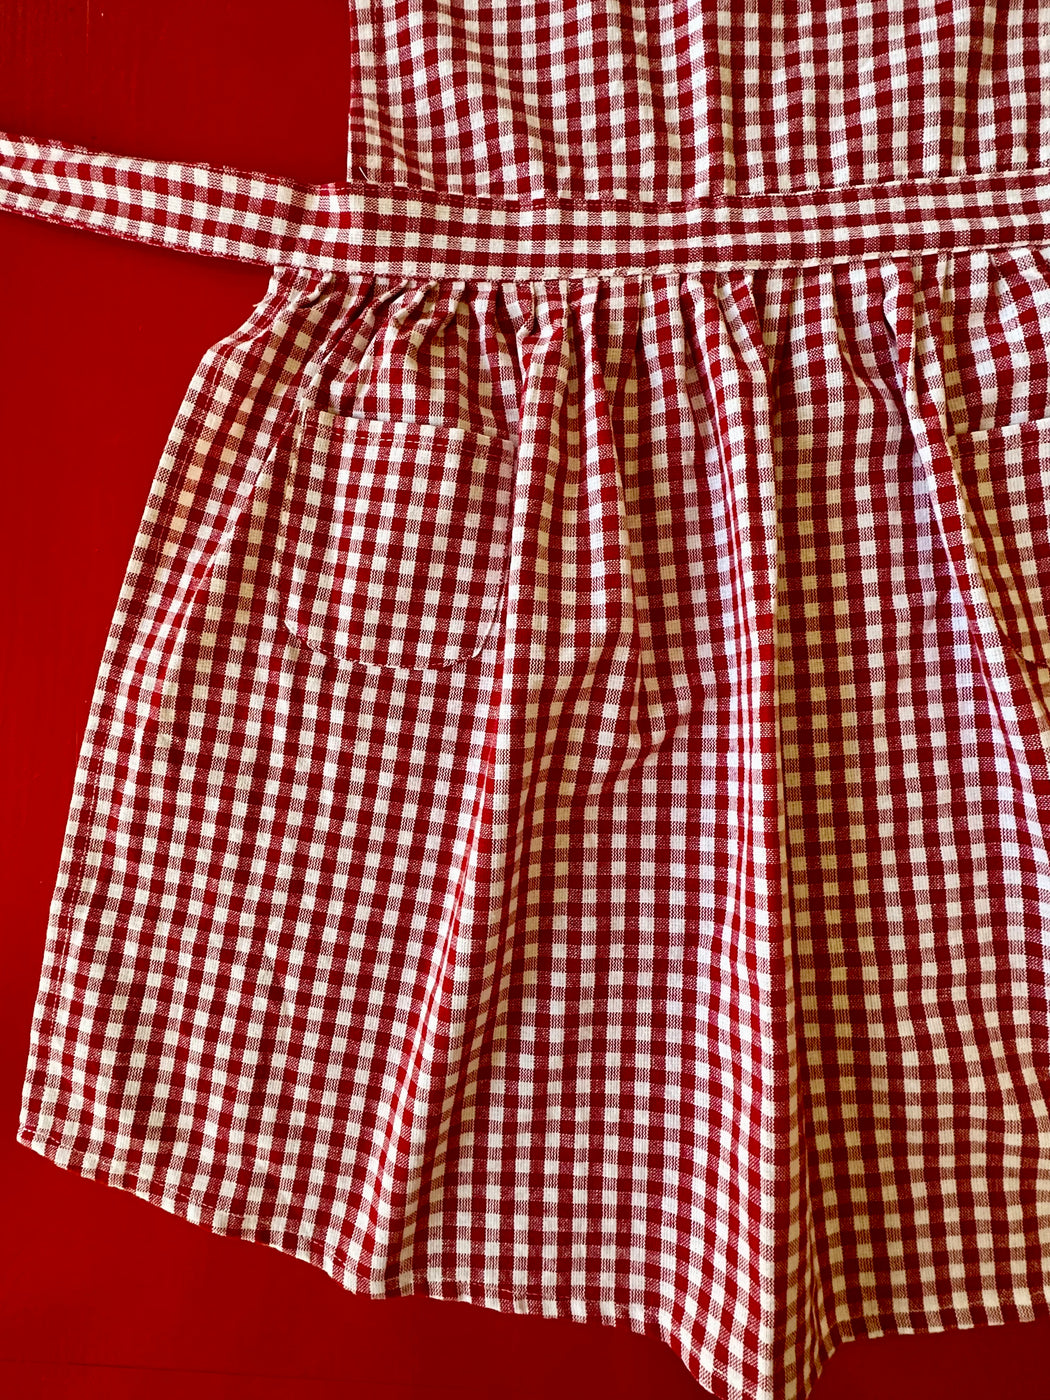 Red Gingham Apron